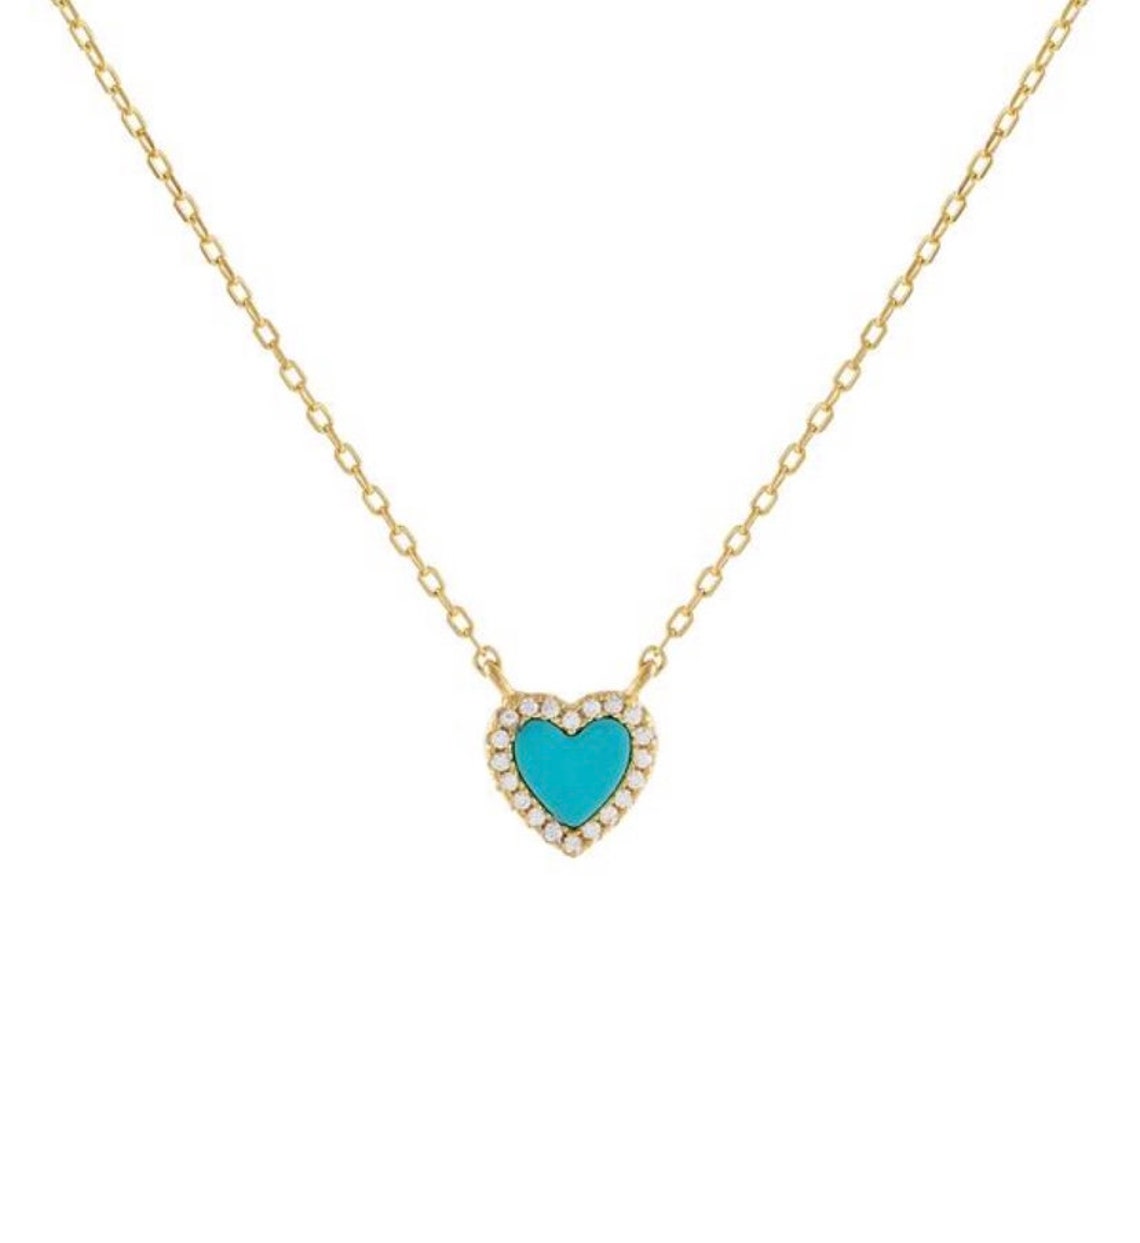 Mini Turquoise Heart Necklace 14K Gold Plated Small Diamond - Etsy